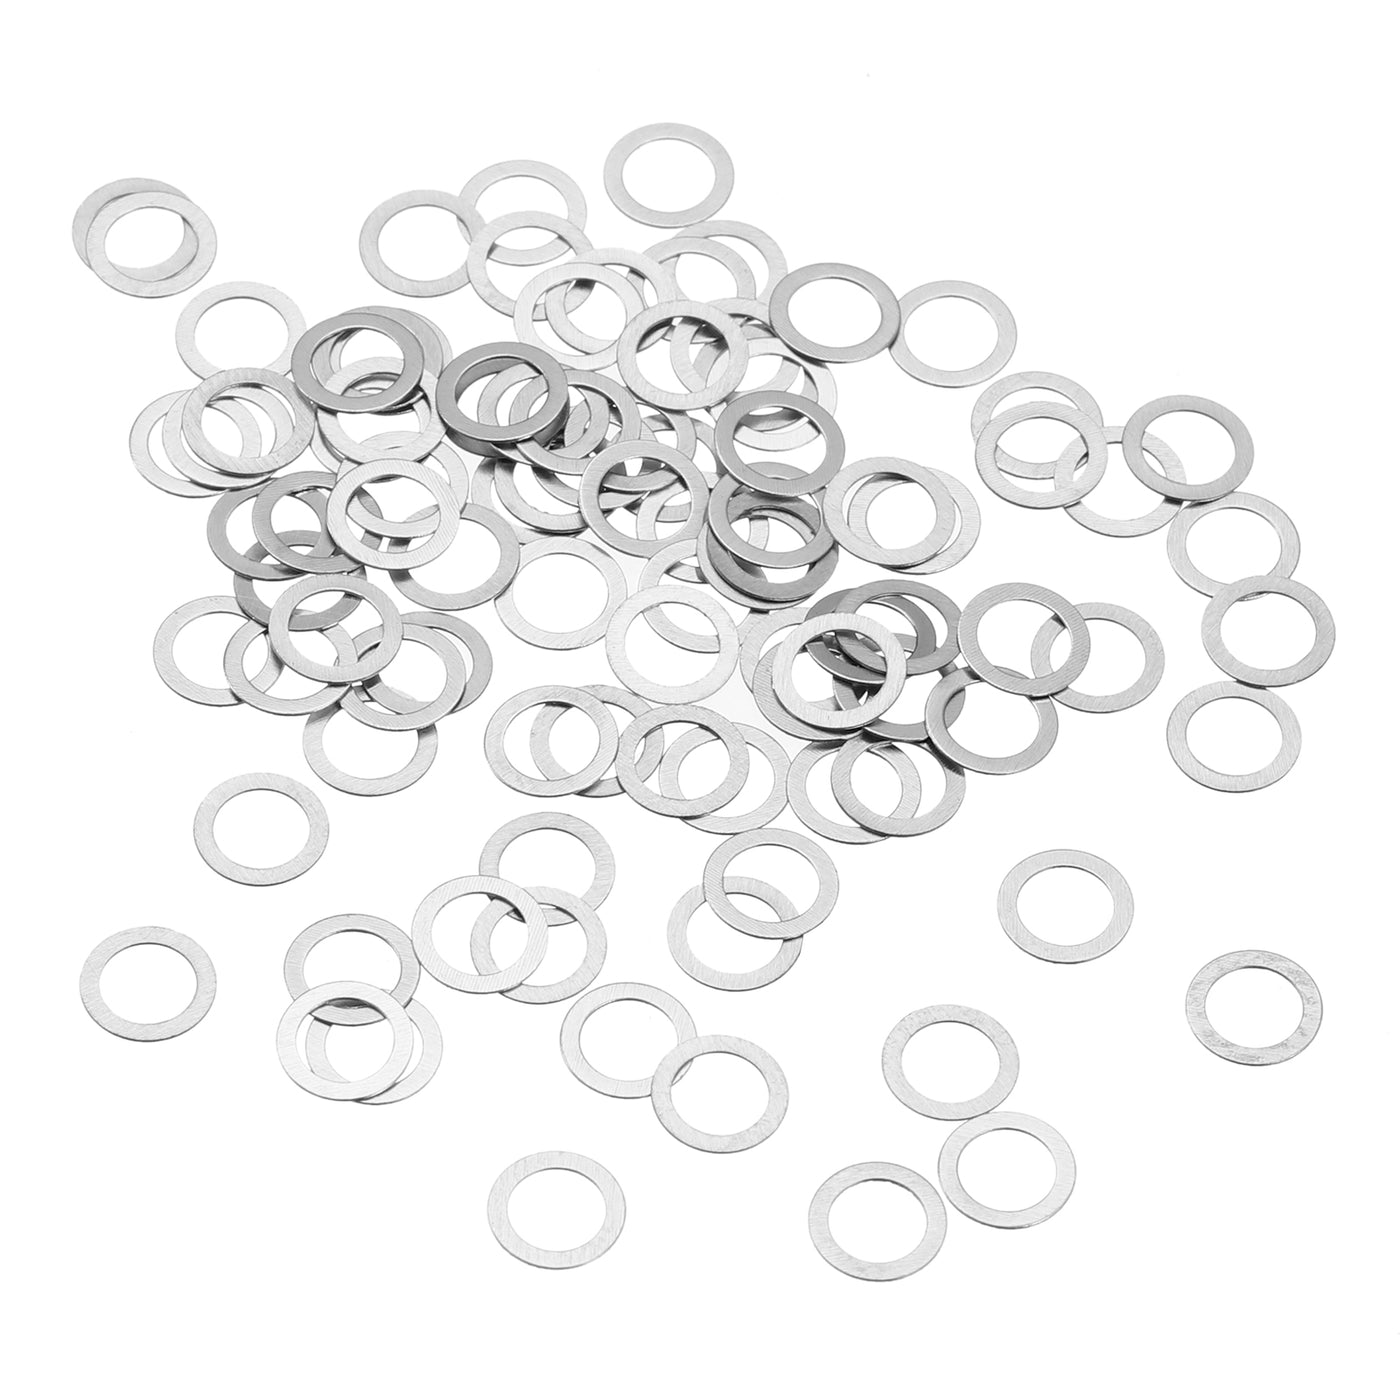 uxcell Uxcell M4 304 Stainless Steel Flat Washers, 100pcs 4x6x0.5mm Ultra Thin Flat Spacers